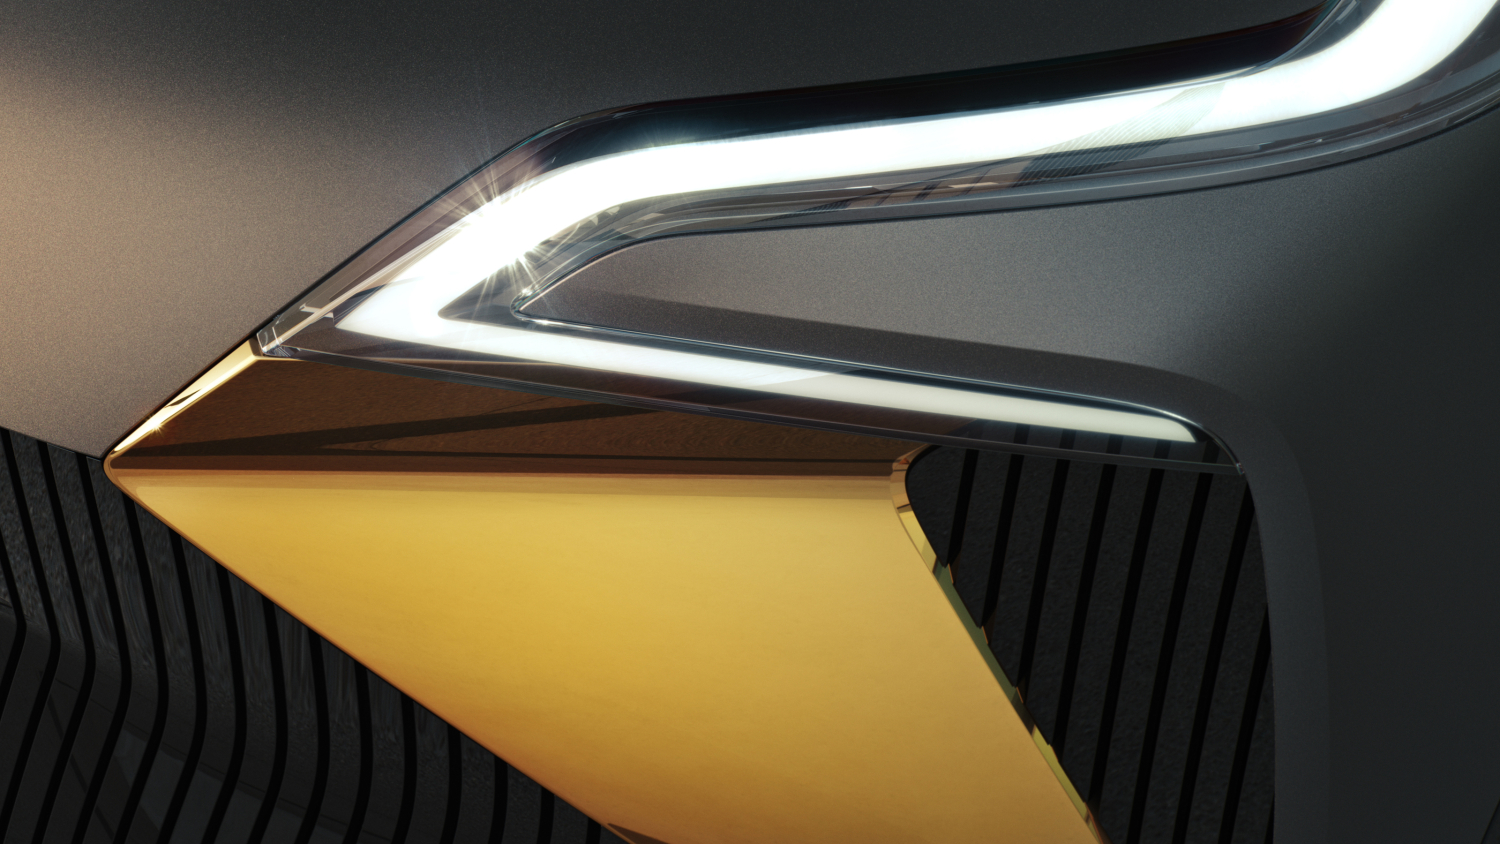 2020 - Teaser showcar announcing Renault’s future electric crossover..jpeg